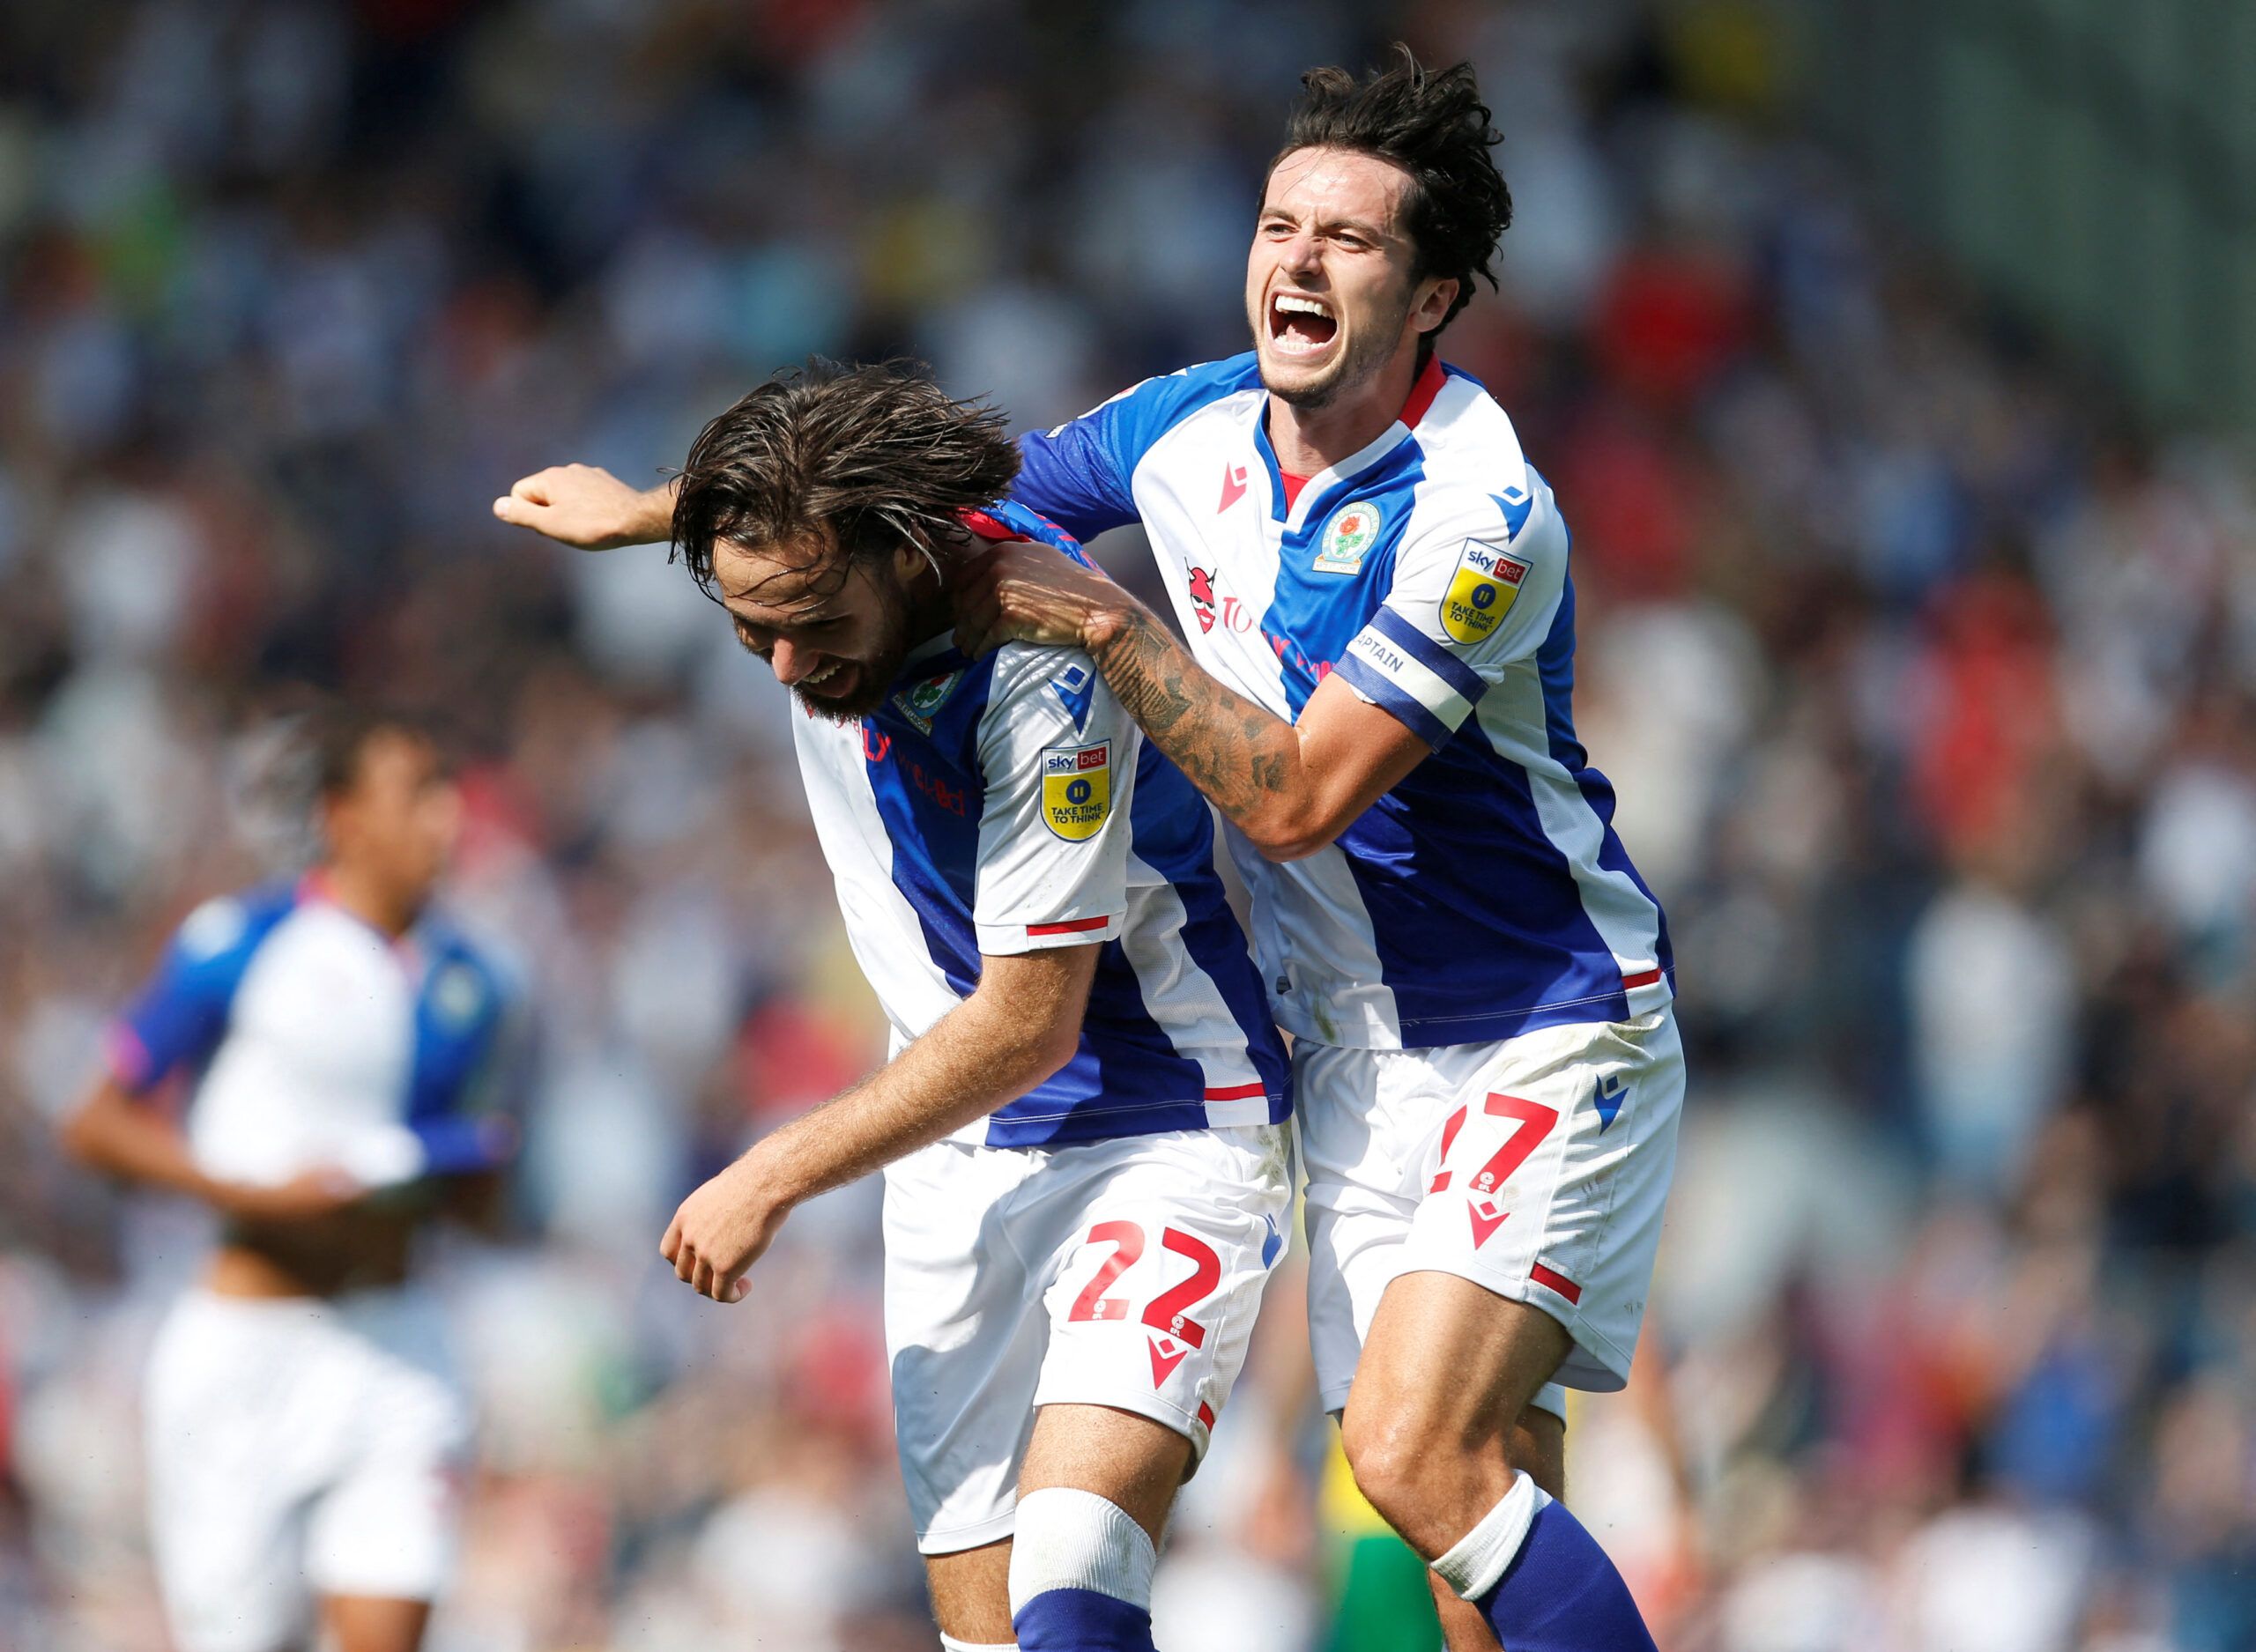 Soccer Football - Championship - Blackburn Rovers v West Bromwich Albion - Ewood Park, Blackburn, Britain - August 14, 2022 Blackburn Rovers' Ben Brereton Diaz celebrates scoring their first goal with Lewis Travis Action Images/Ed Sykes  EDITORIAL USE ONLY. No use with unauthorized audio, video, data, fixture lists, club/league logos or 